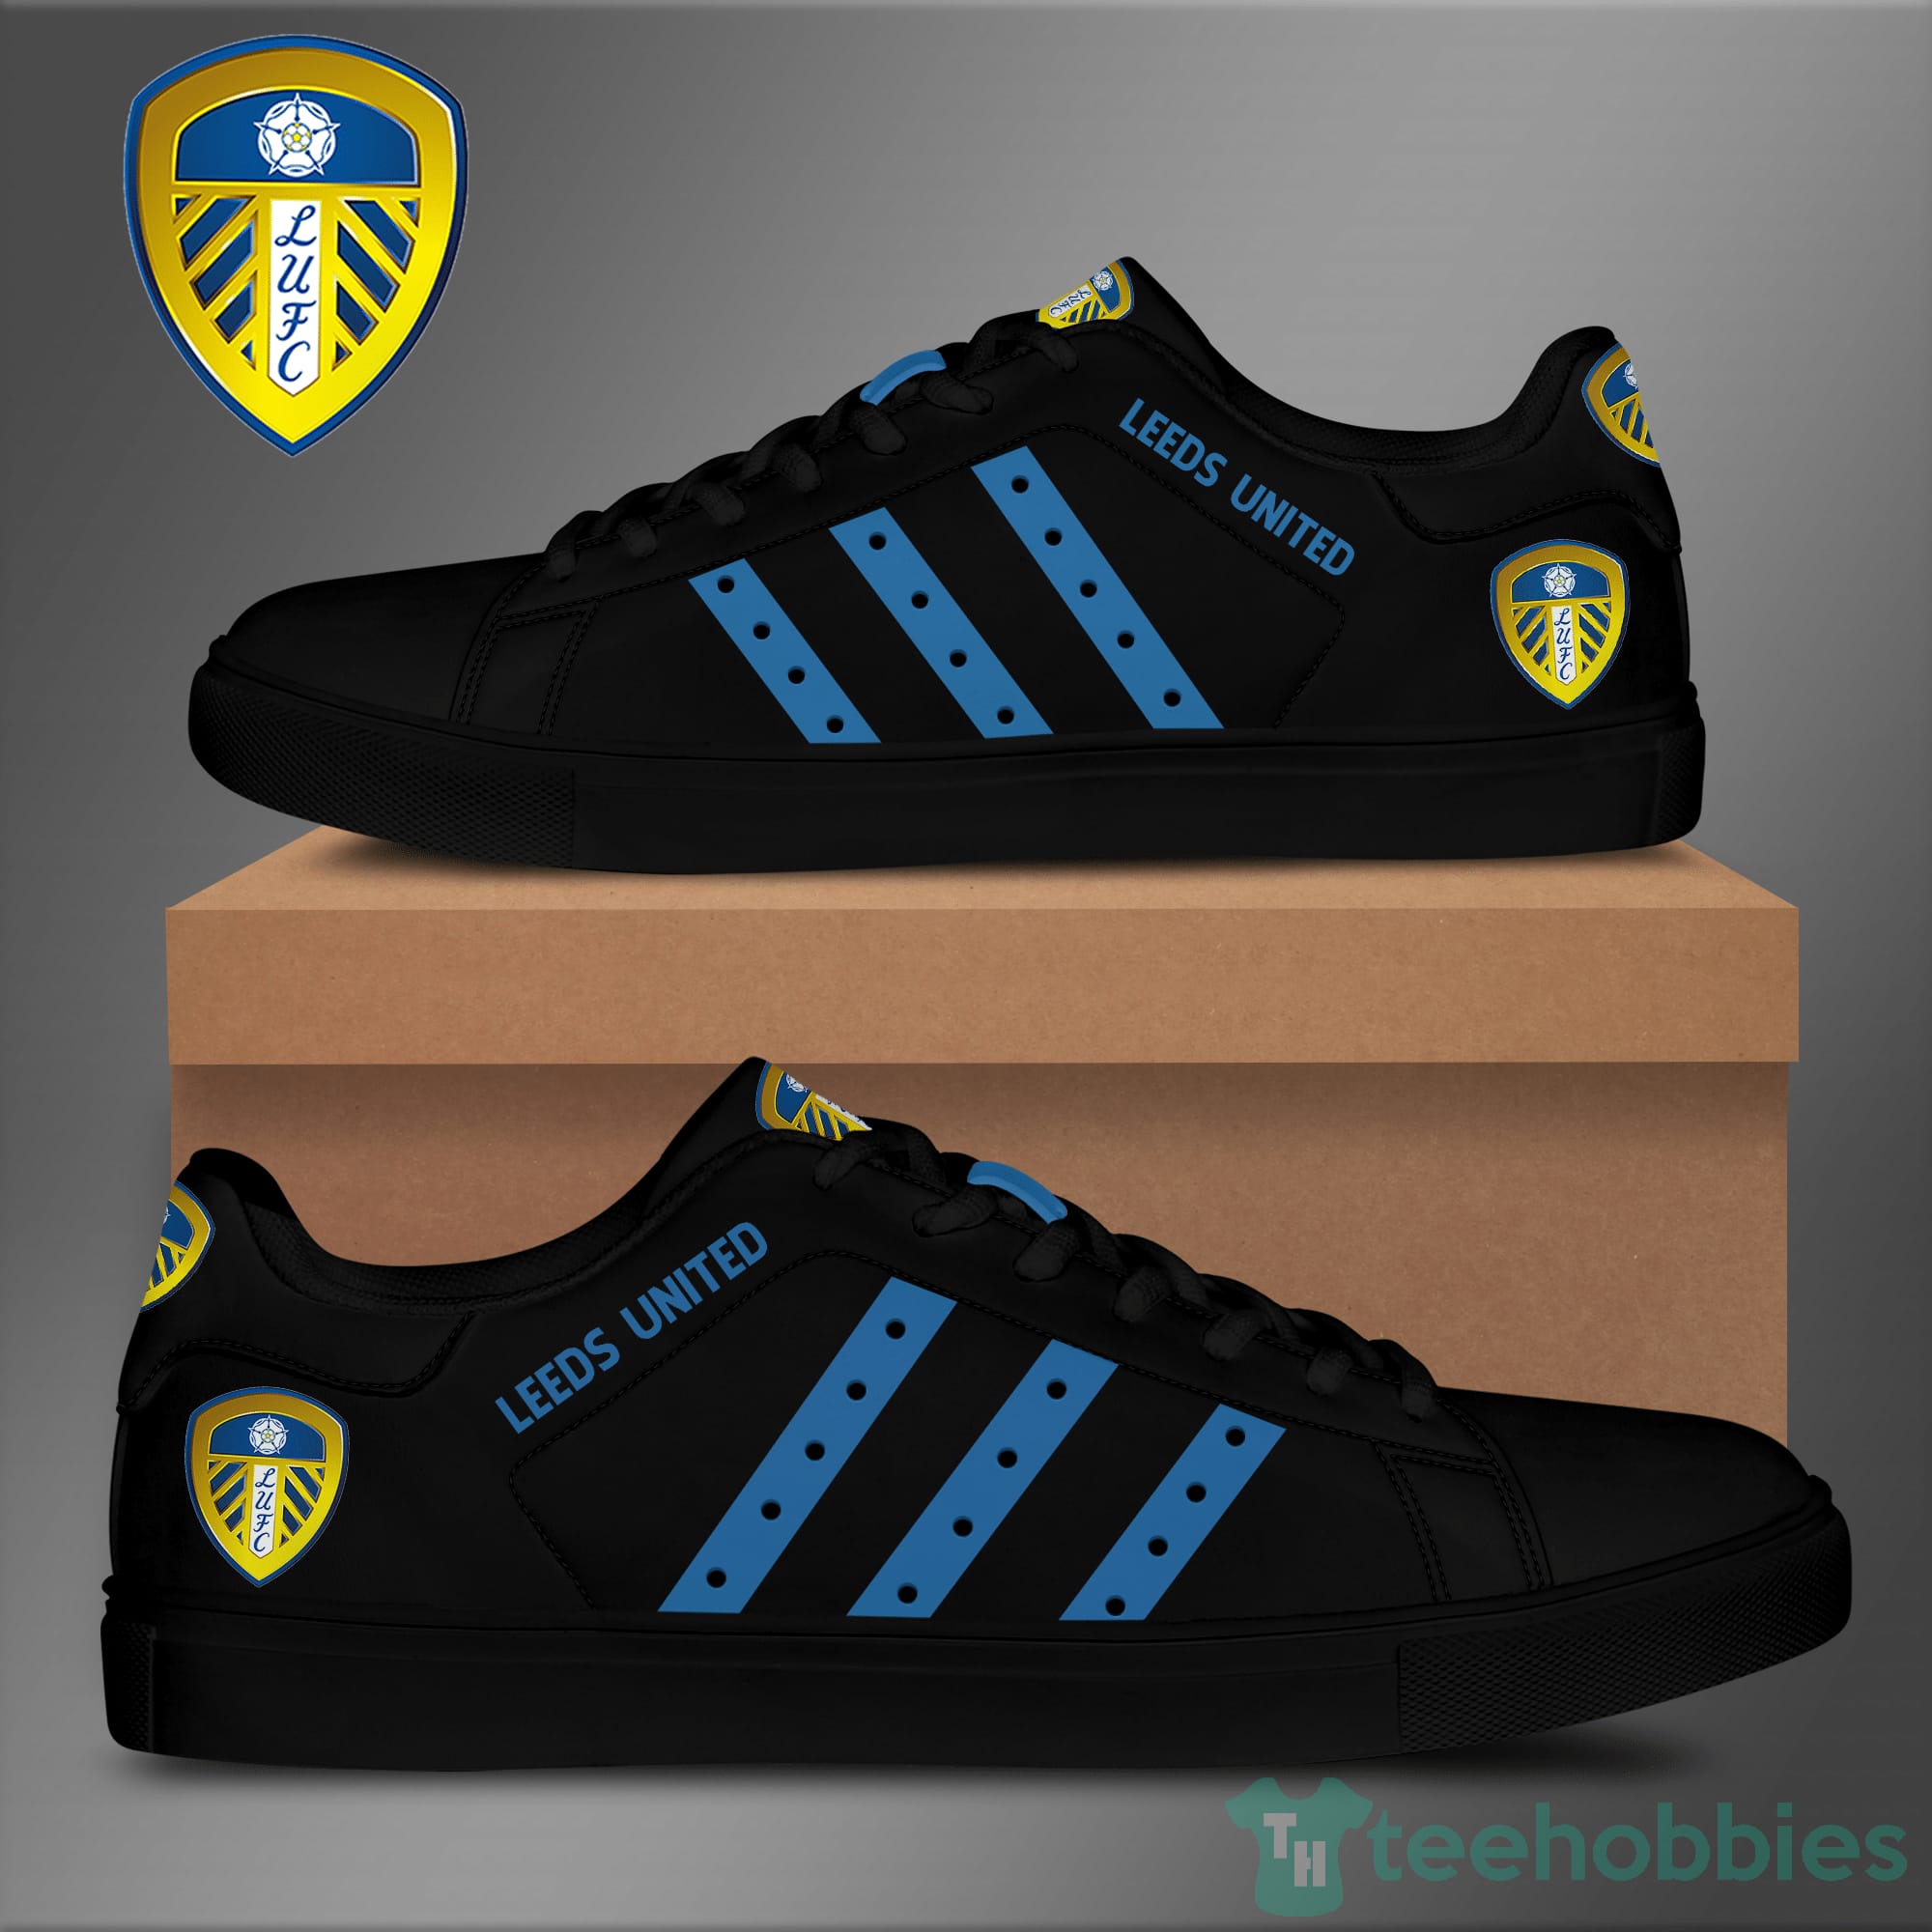 Leeds United F.C Black Low Top Skate Shoes Product photo 2